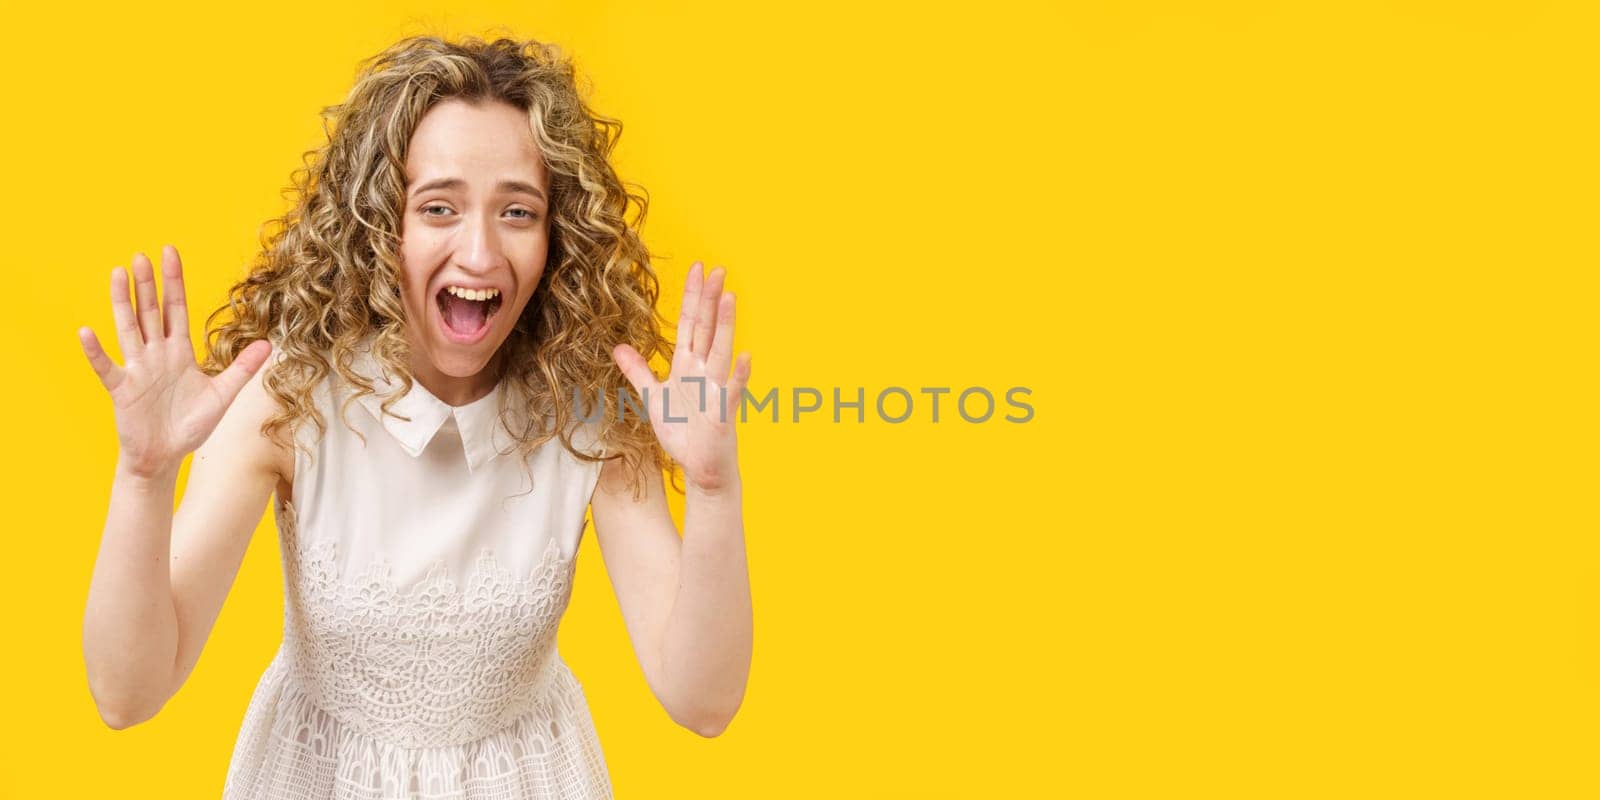 A curly-haired woman raises her palms in joy, glad to receive an amazing gift from someone, screams loudly, wearing a striped shirt. Isolated on a yellow background.